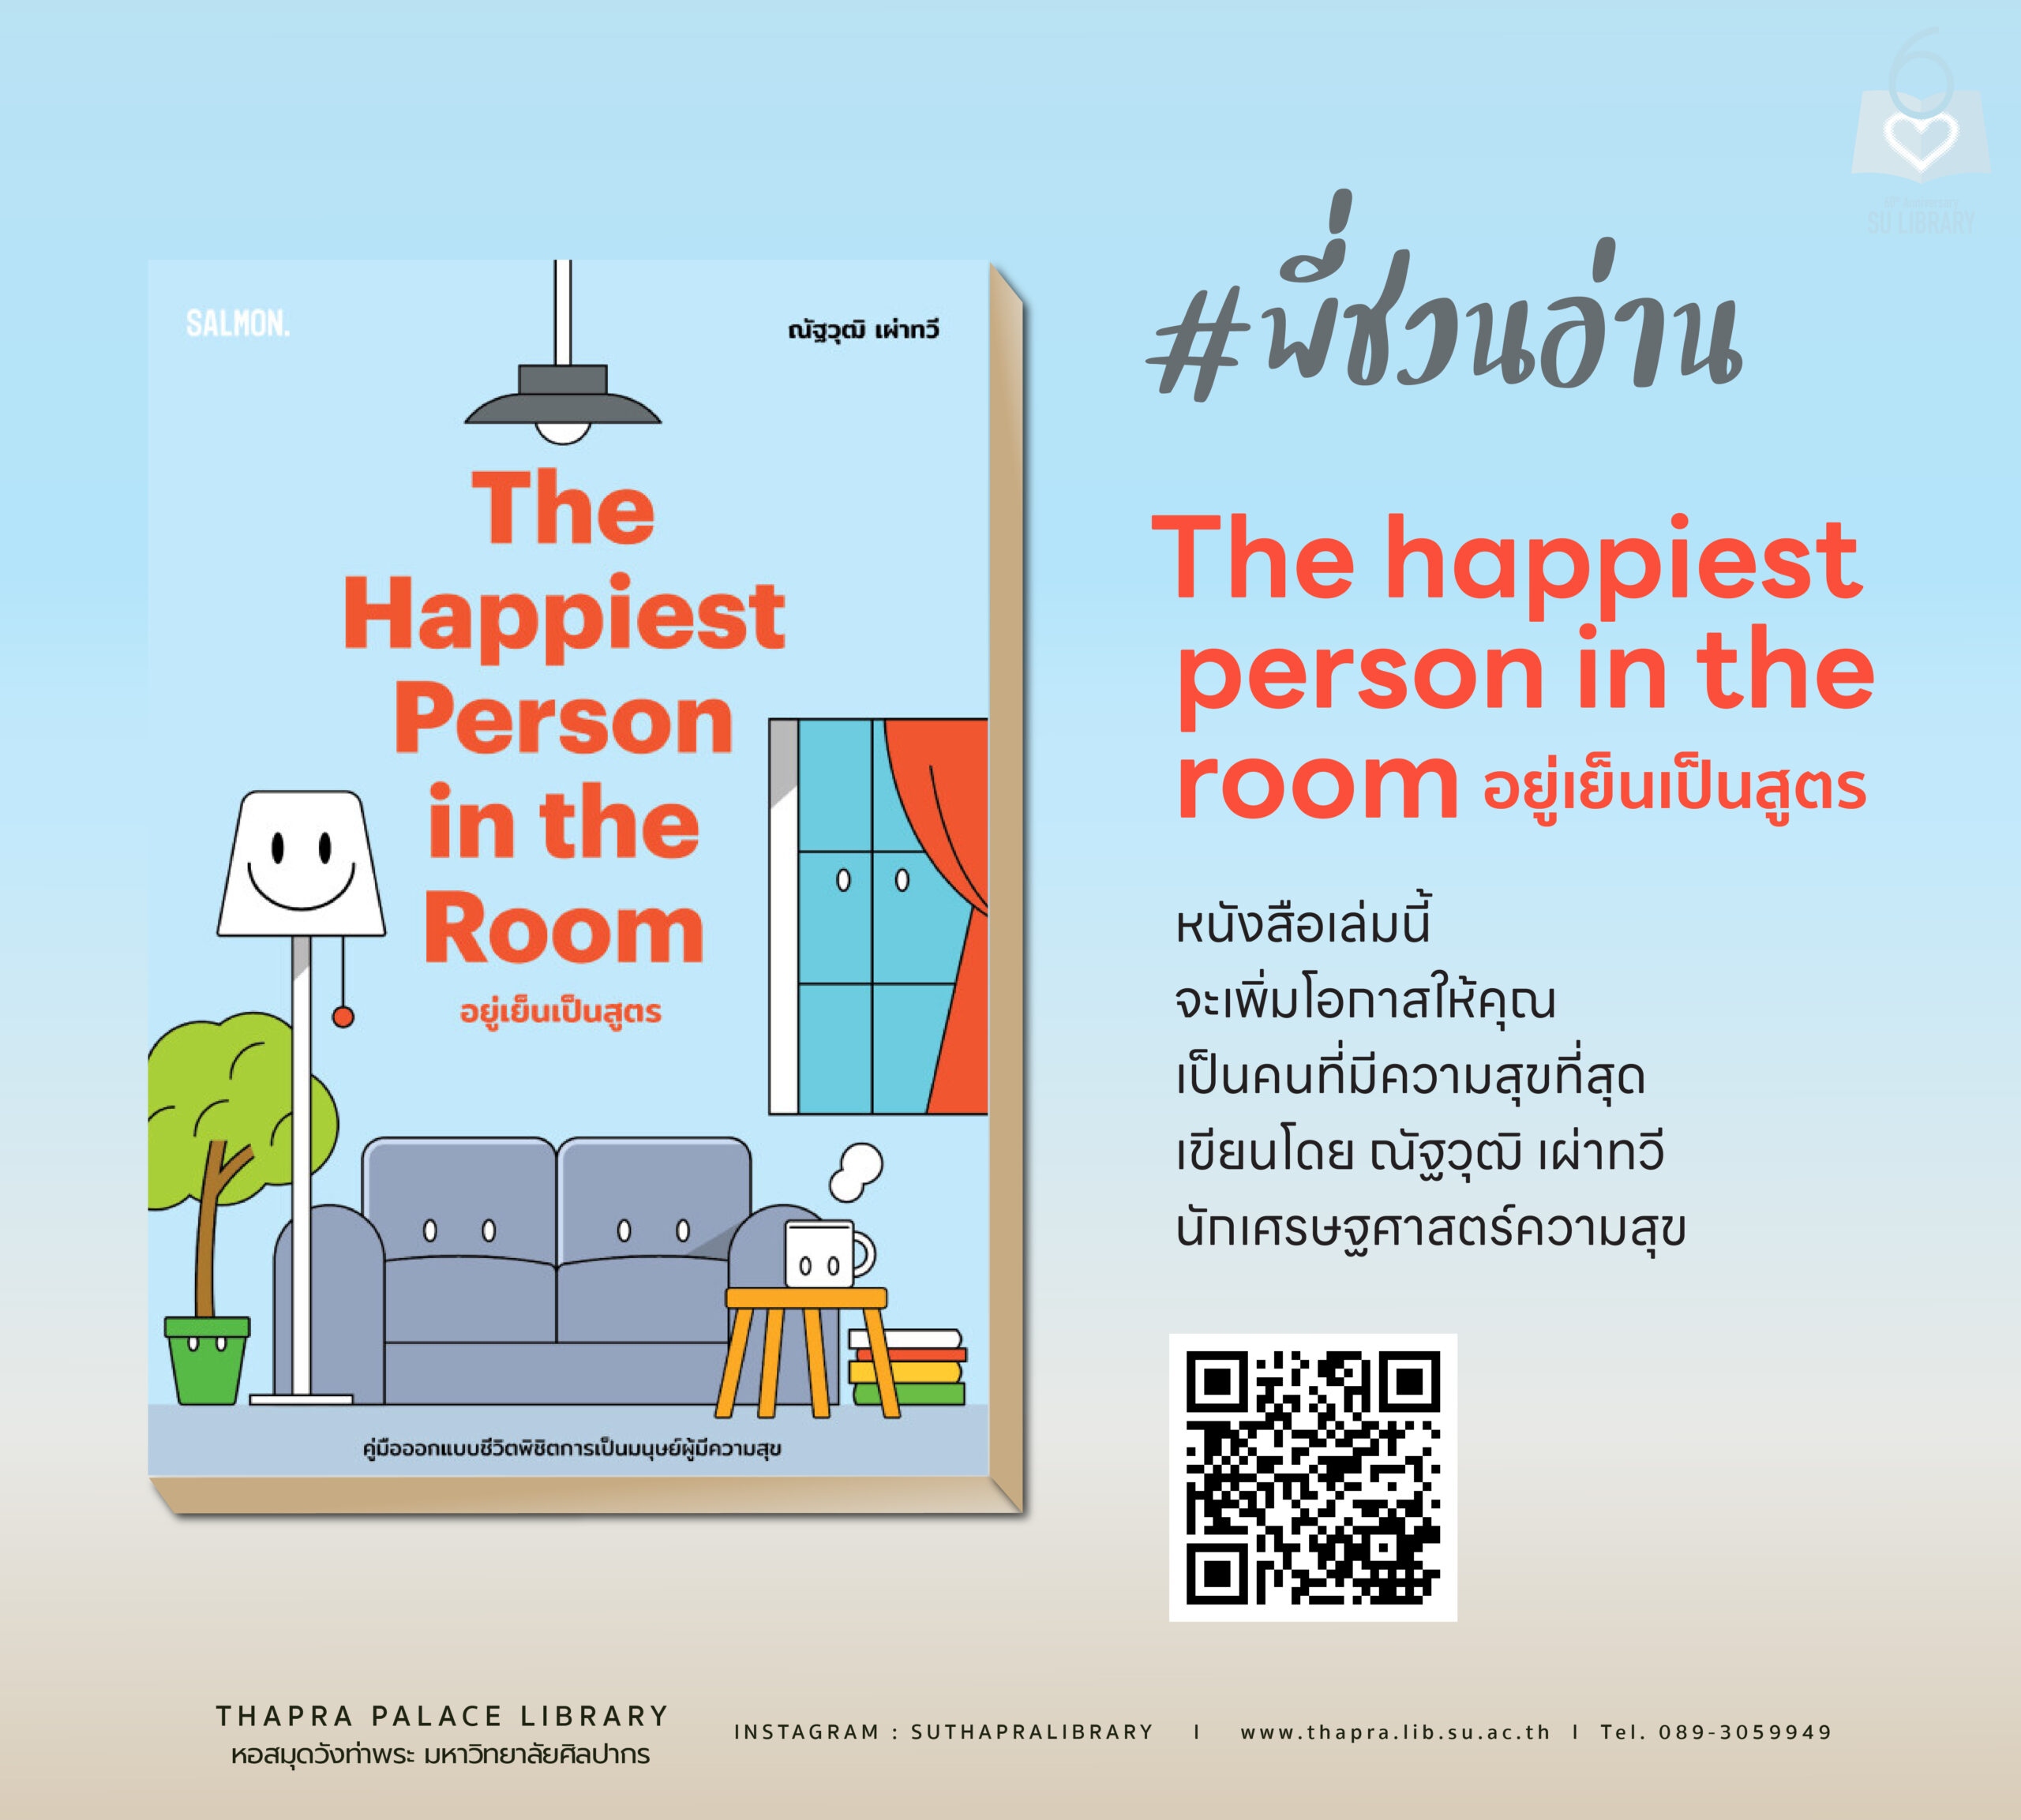 The happiest person in the room อยู่เย็นเป็นสูตร